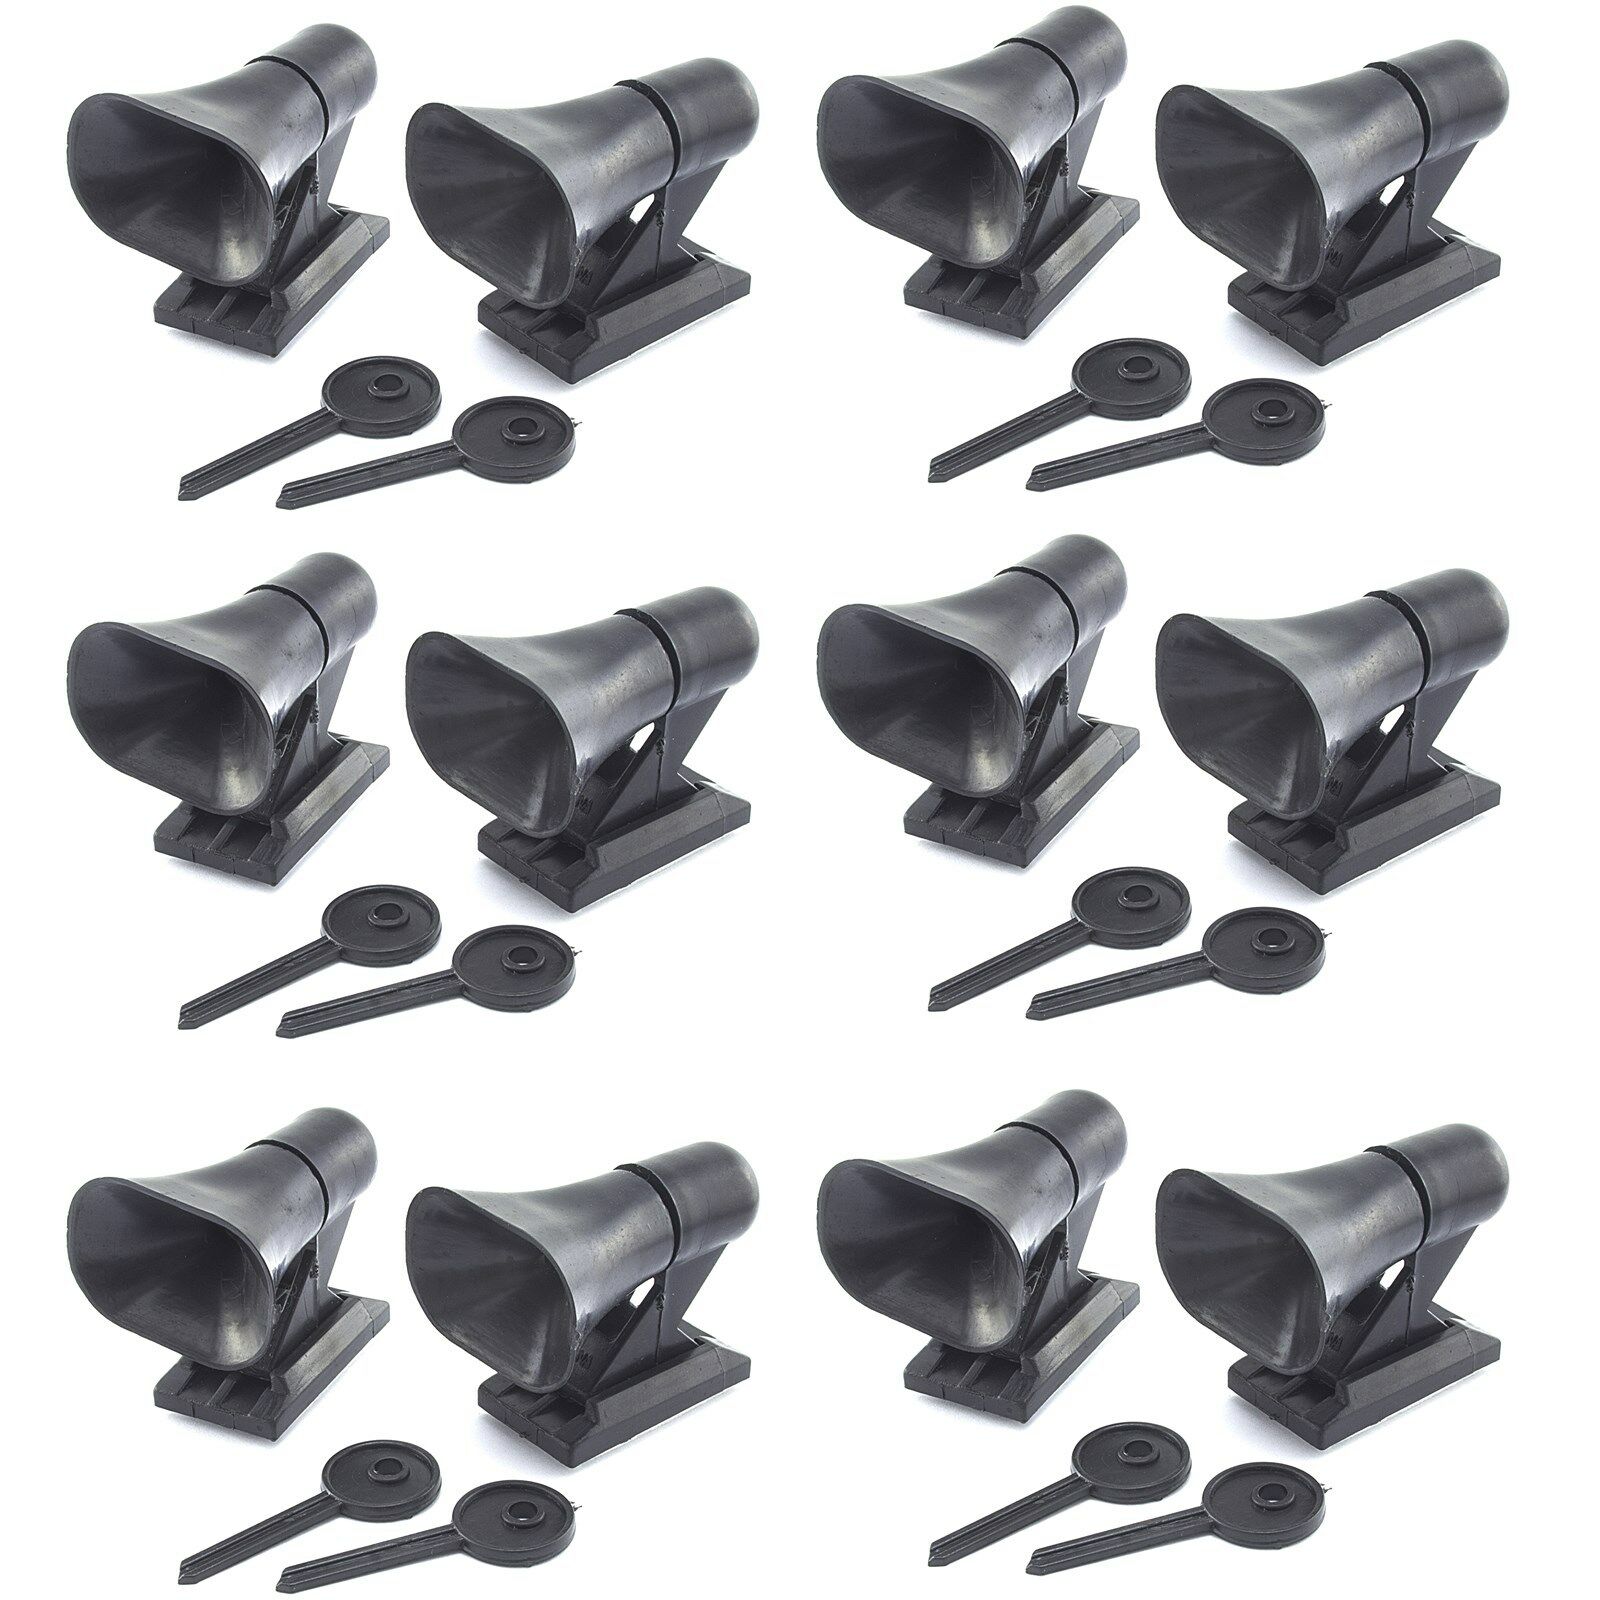 12 Piece Ultrasonic Car Deer Warning Whistle Auto Safety Save A Animal Alert